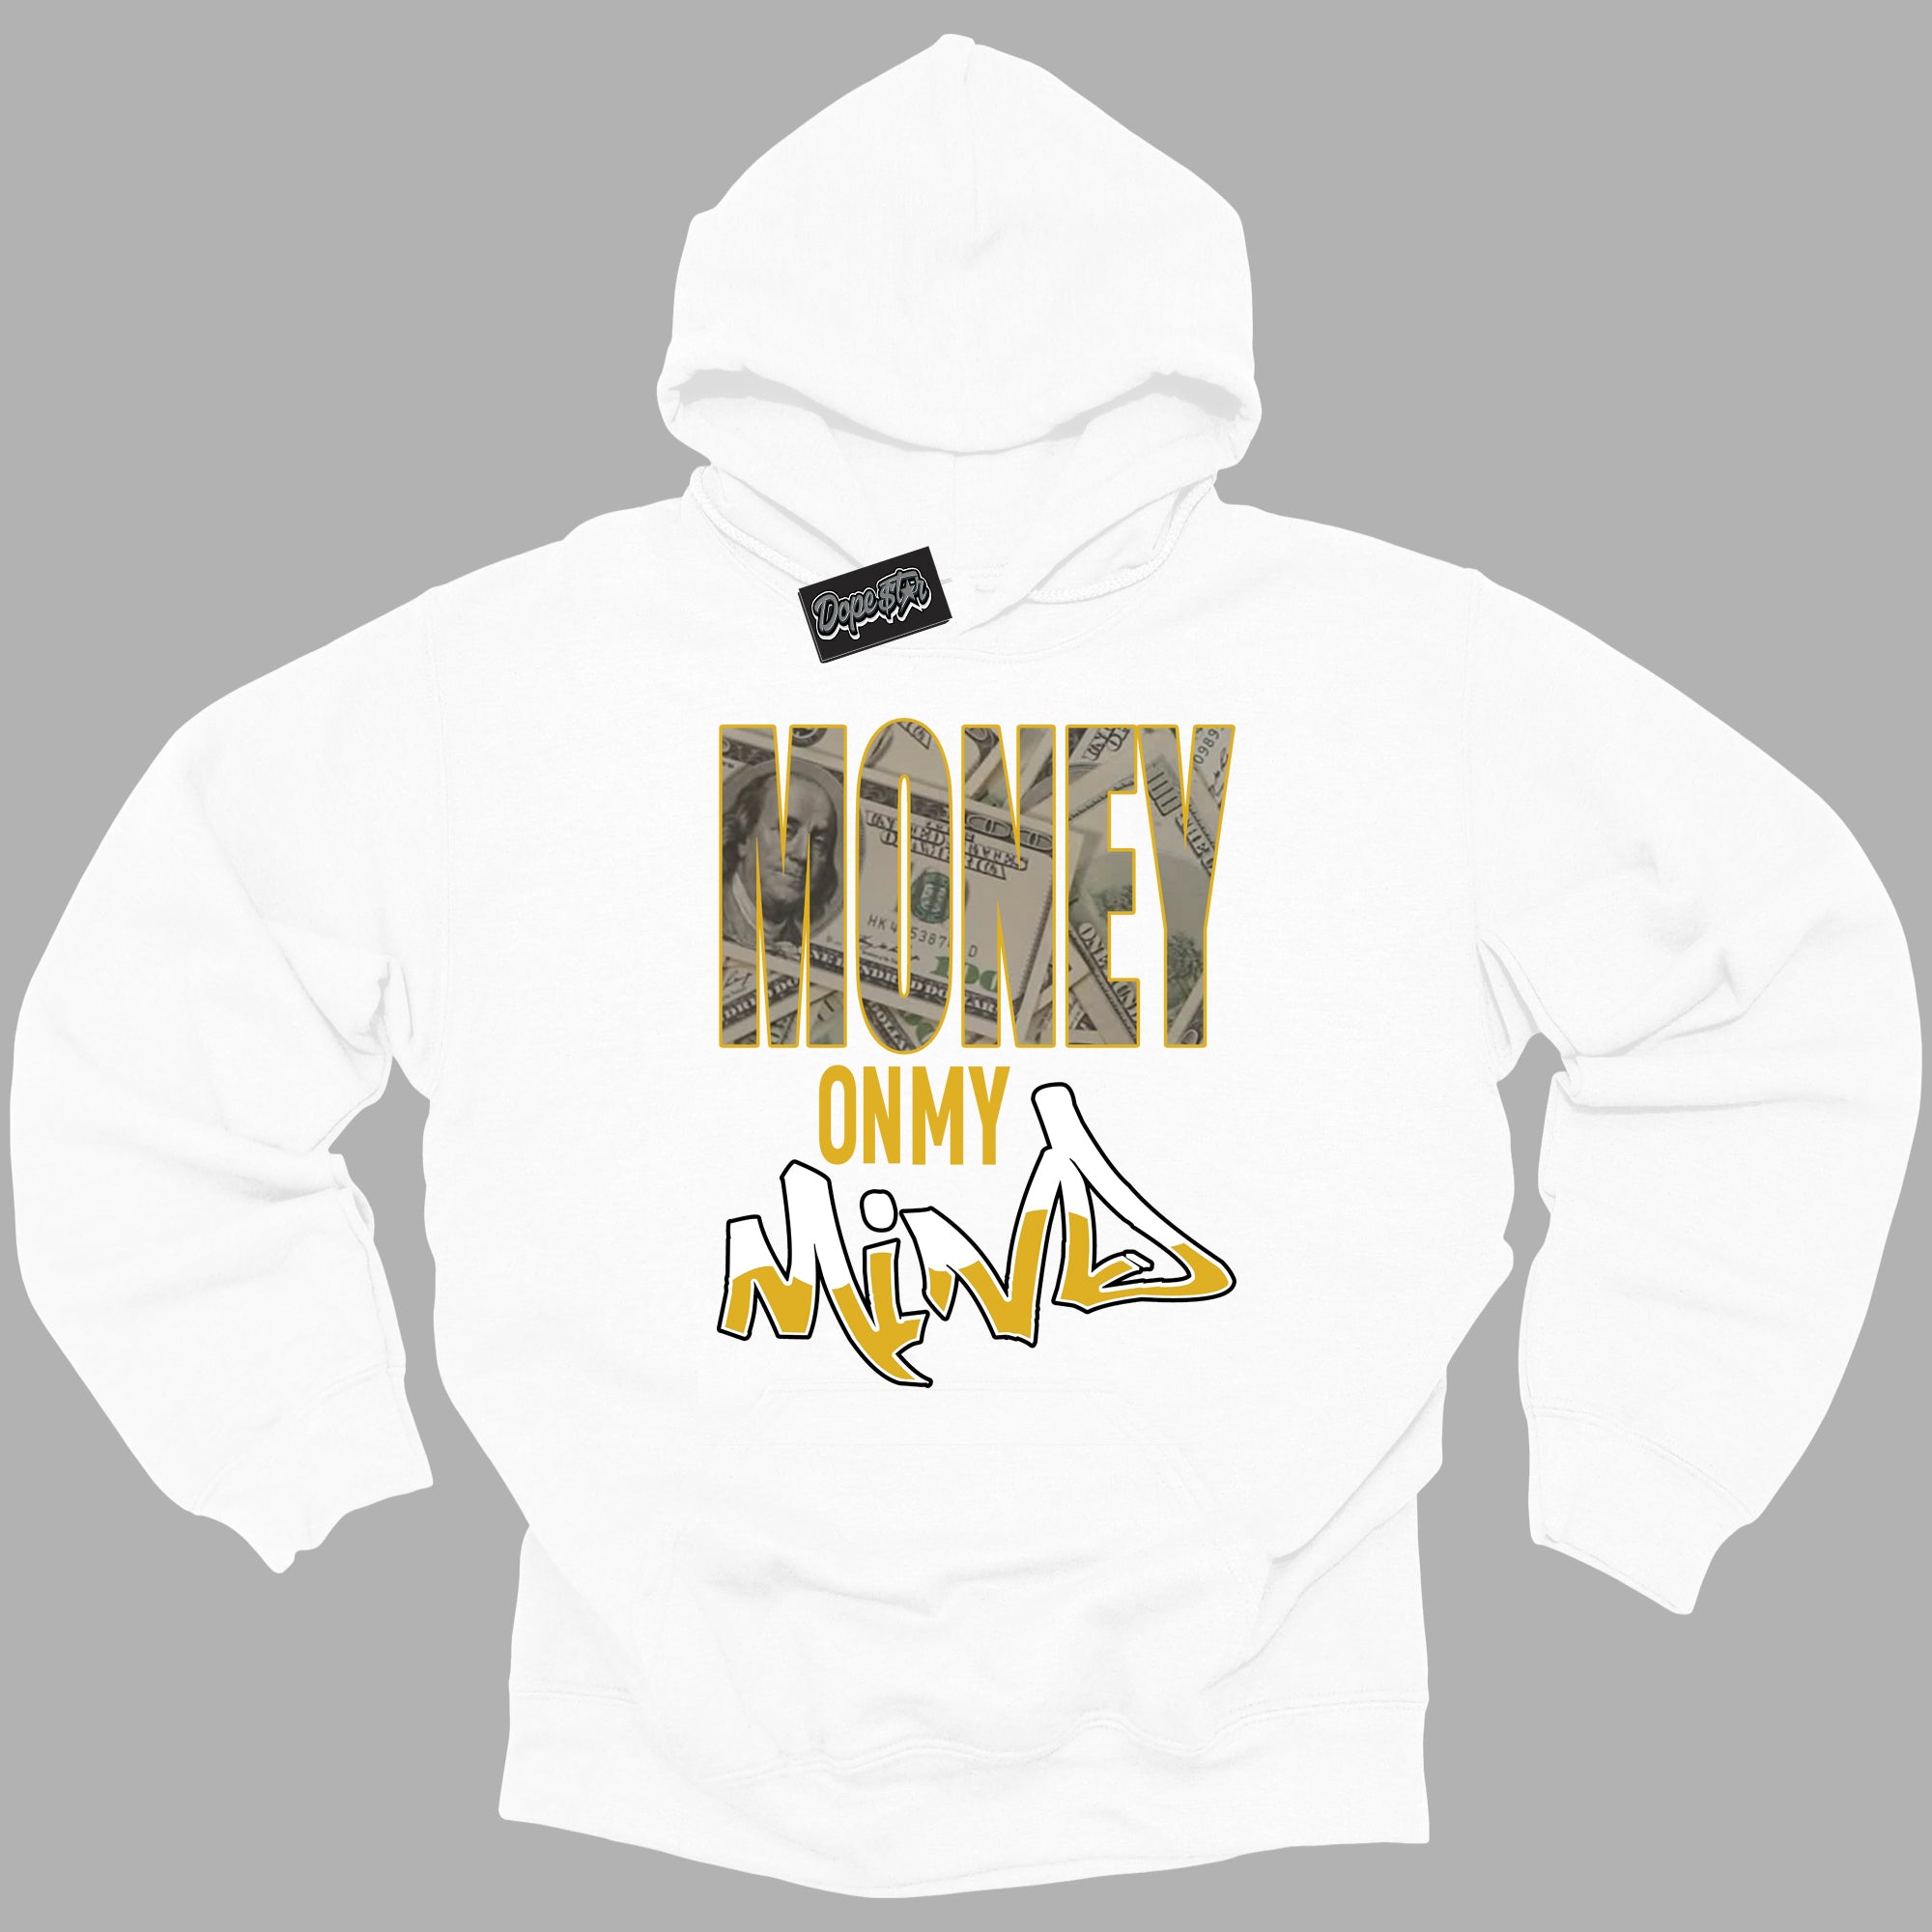 Cool White Hoodie with “ Money On My Mind ”  design that Perfectly Matches Yellow Ochre 6s Sneakers.